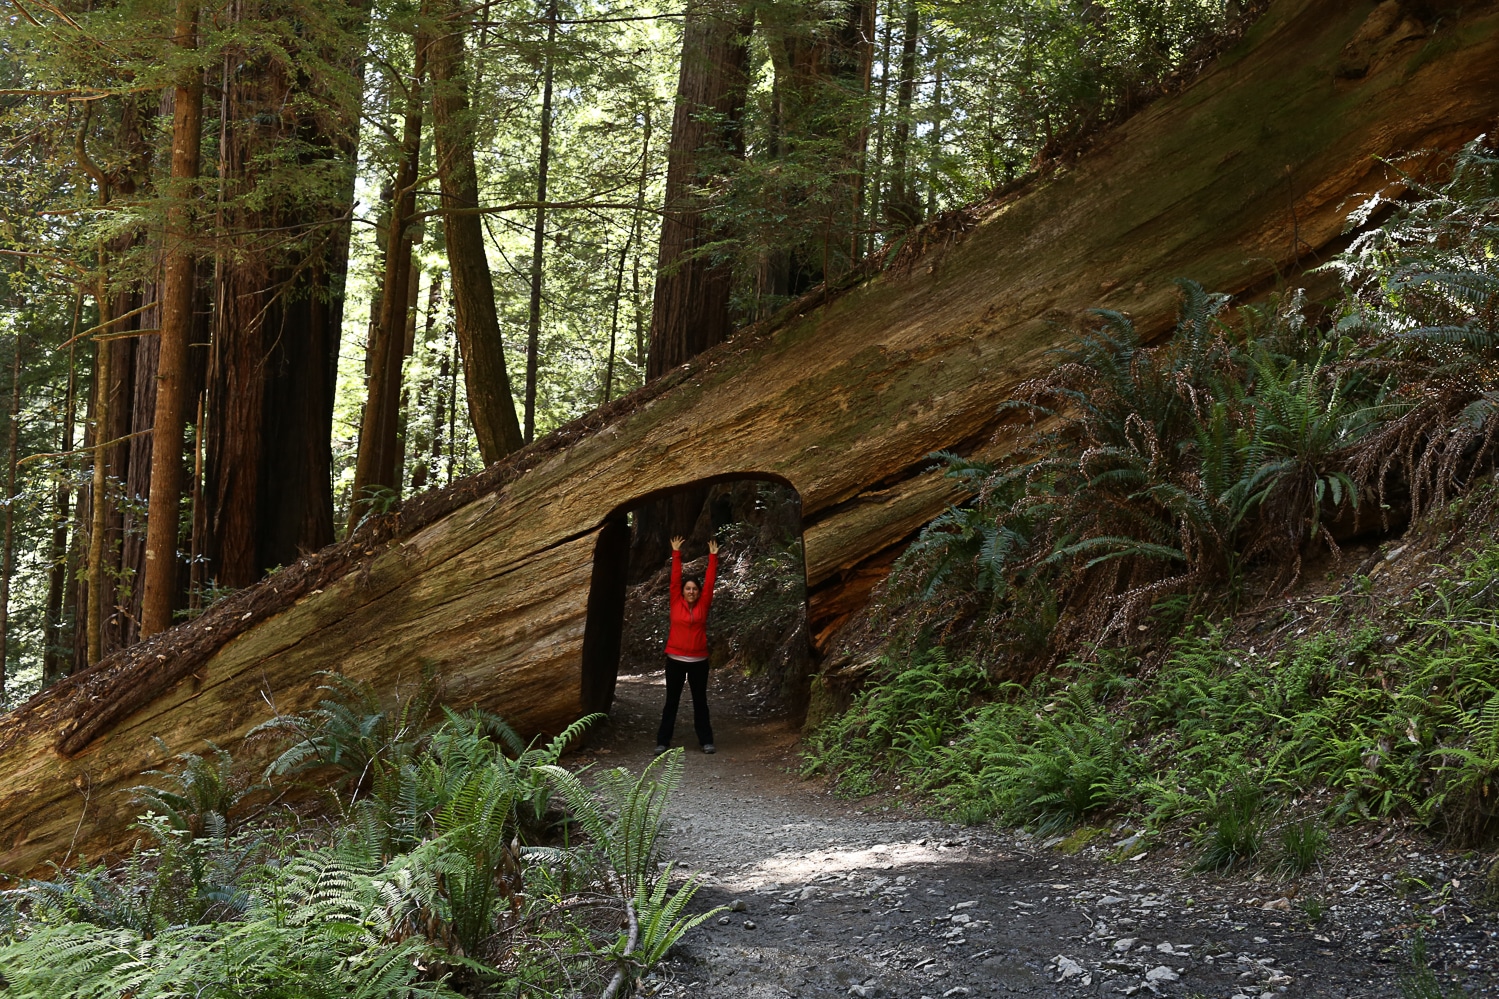 Cut out of fallen redwood tree to walk under